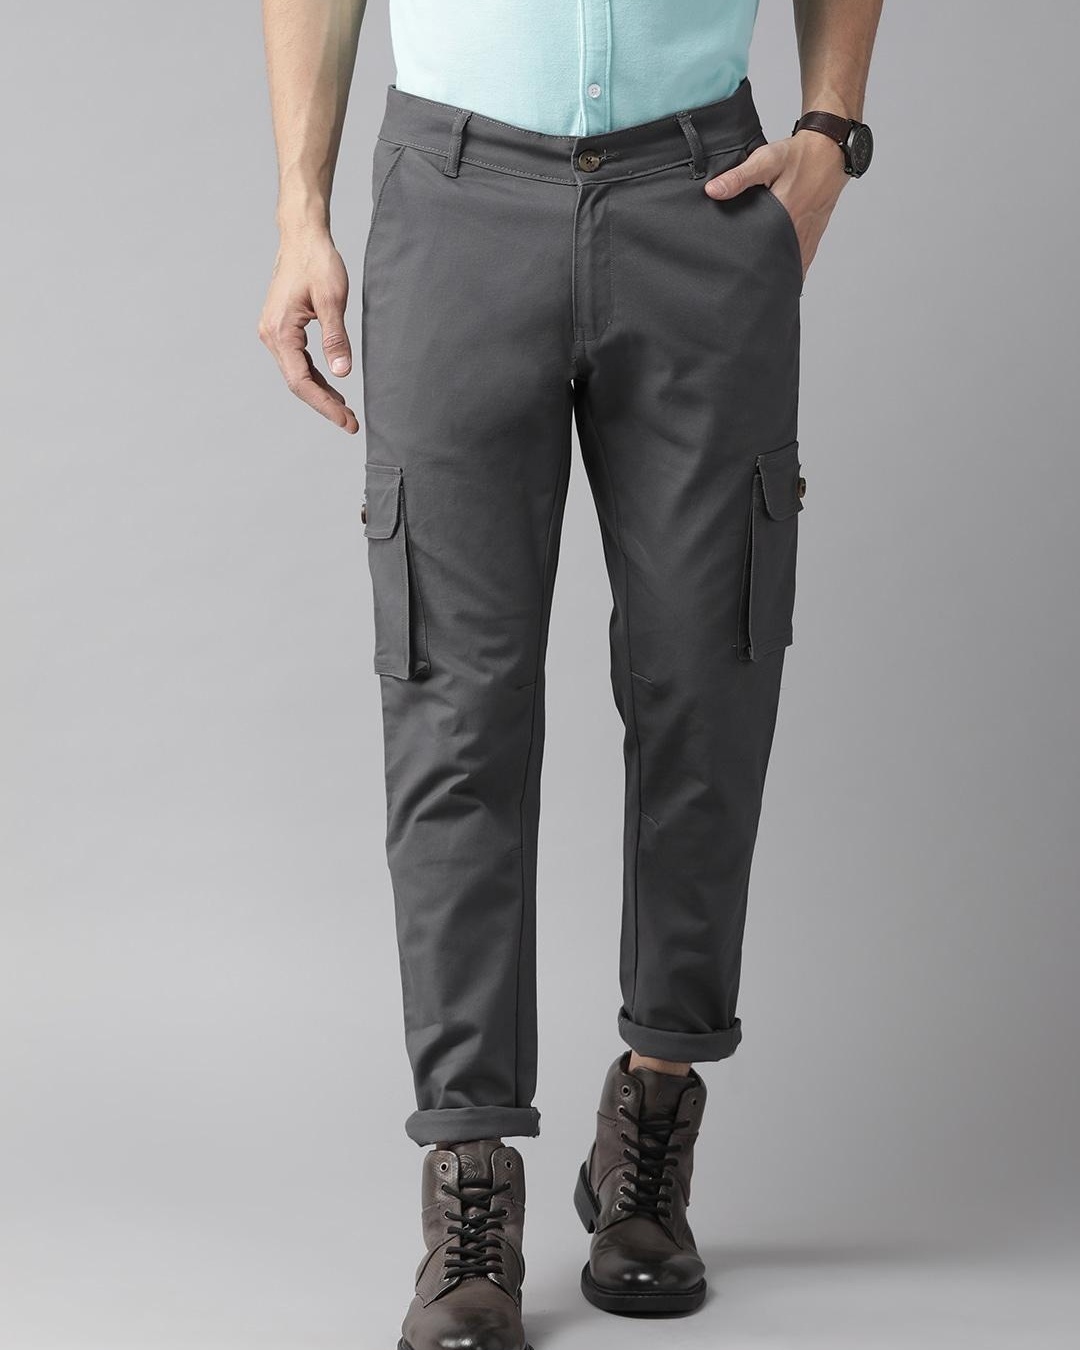 Buy Slim Fit FlatFront Trousers with Contrast Taping online  Looksgudin